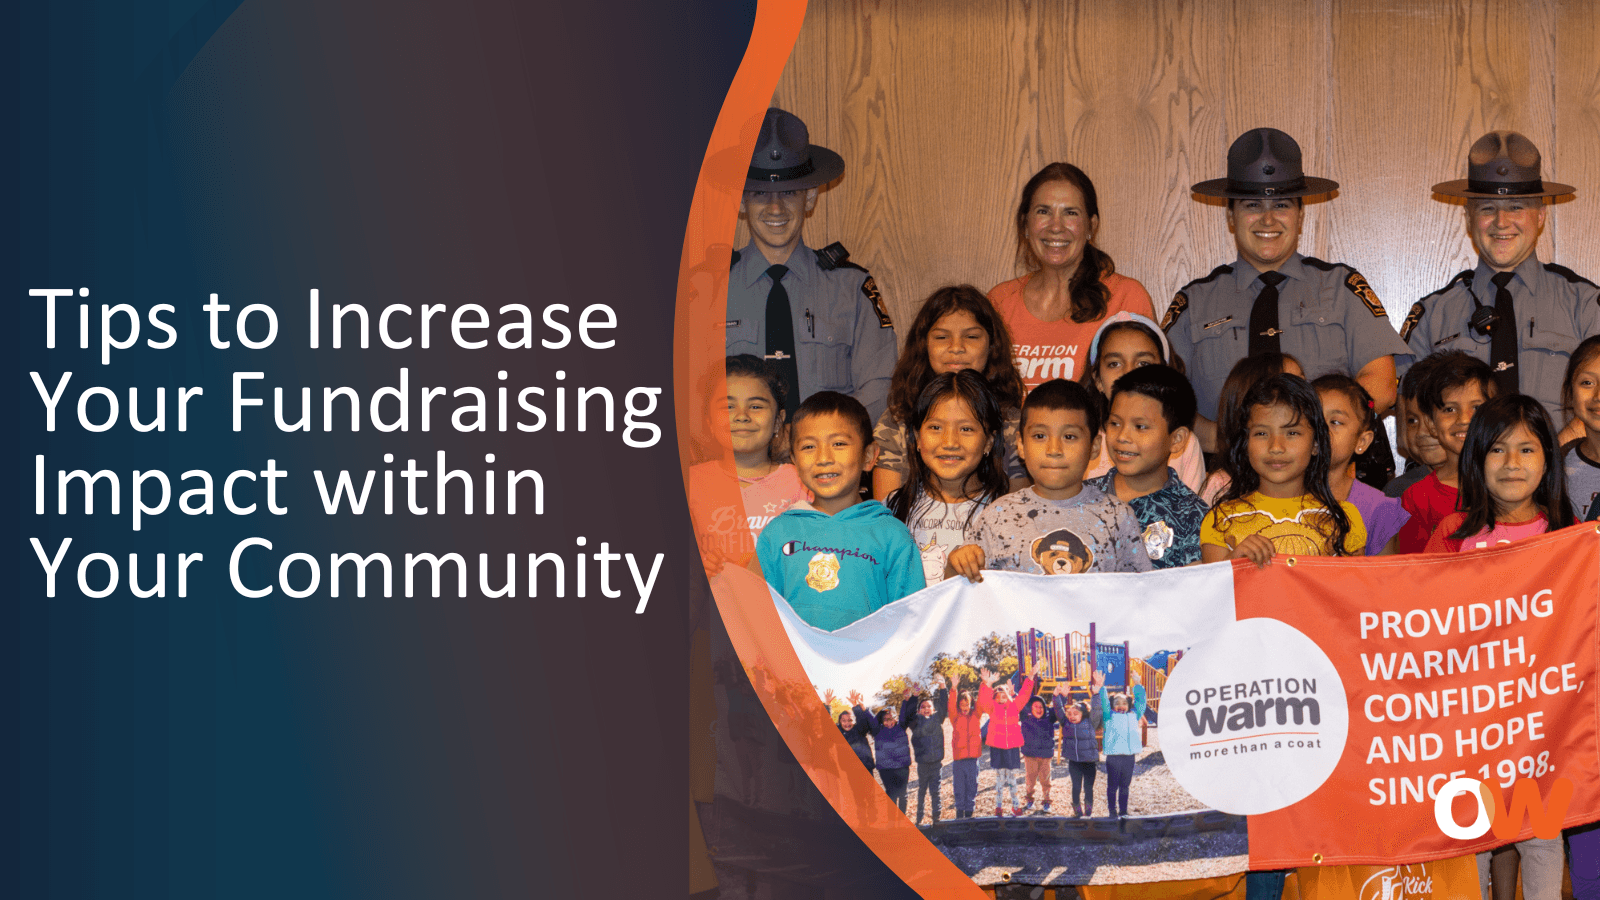 Tips to Increase Your Fundraising Impact within Your Community